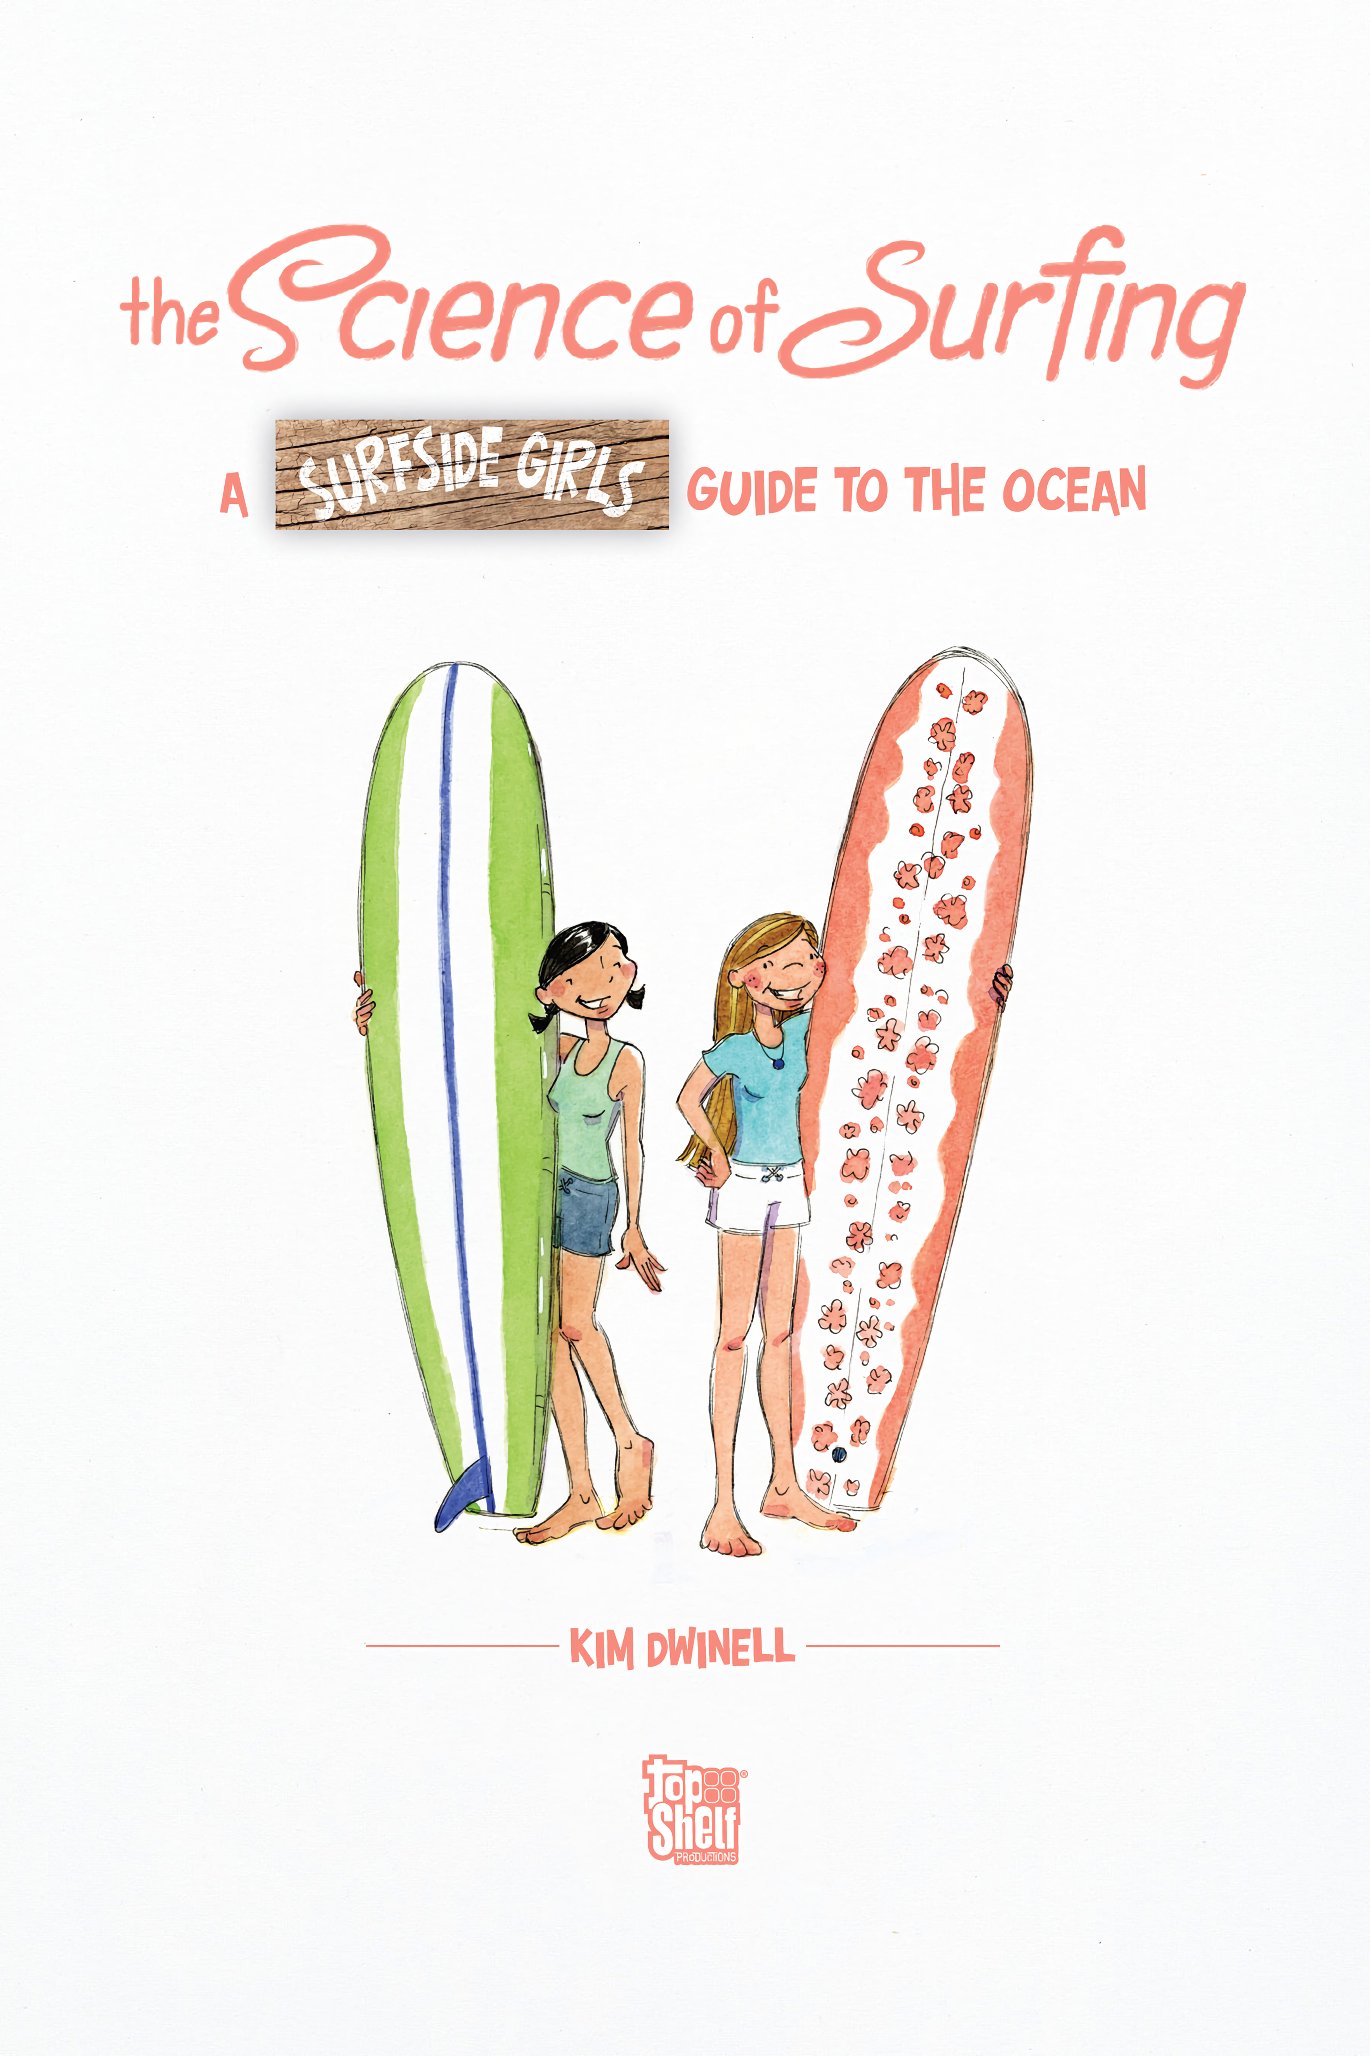 Read online The Science of Surfing: A Surfside Girls Guide to the Ocean comic -  Issue # TPB - 3